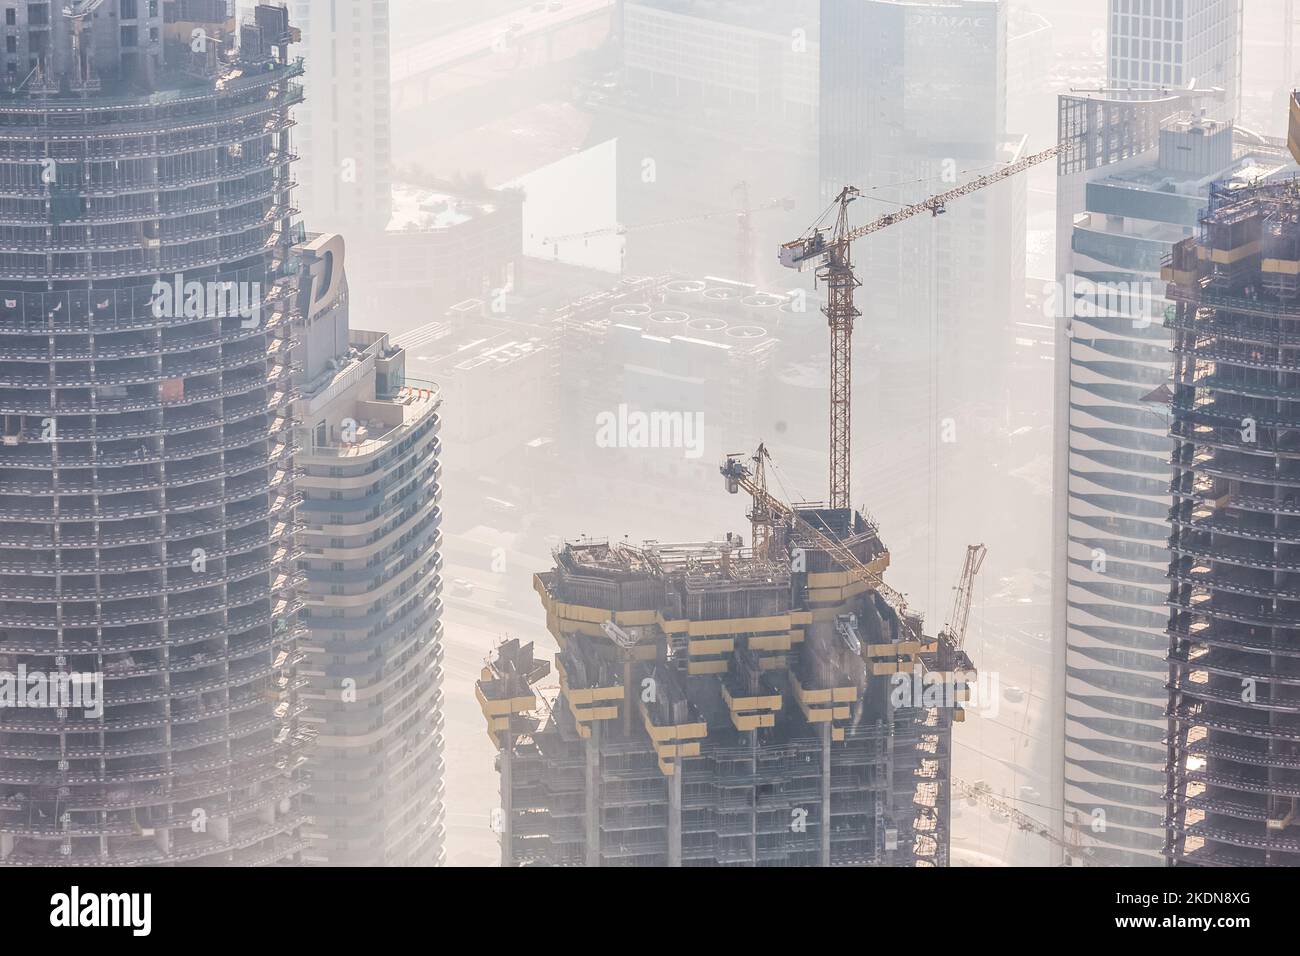 Huge skyscrappers construction site with cranes on top of buildings. Rapid urban and construction sector development or inflation of real estate bubble. Stock Photo